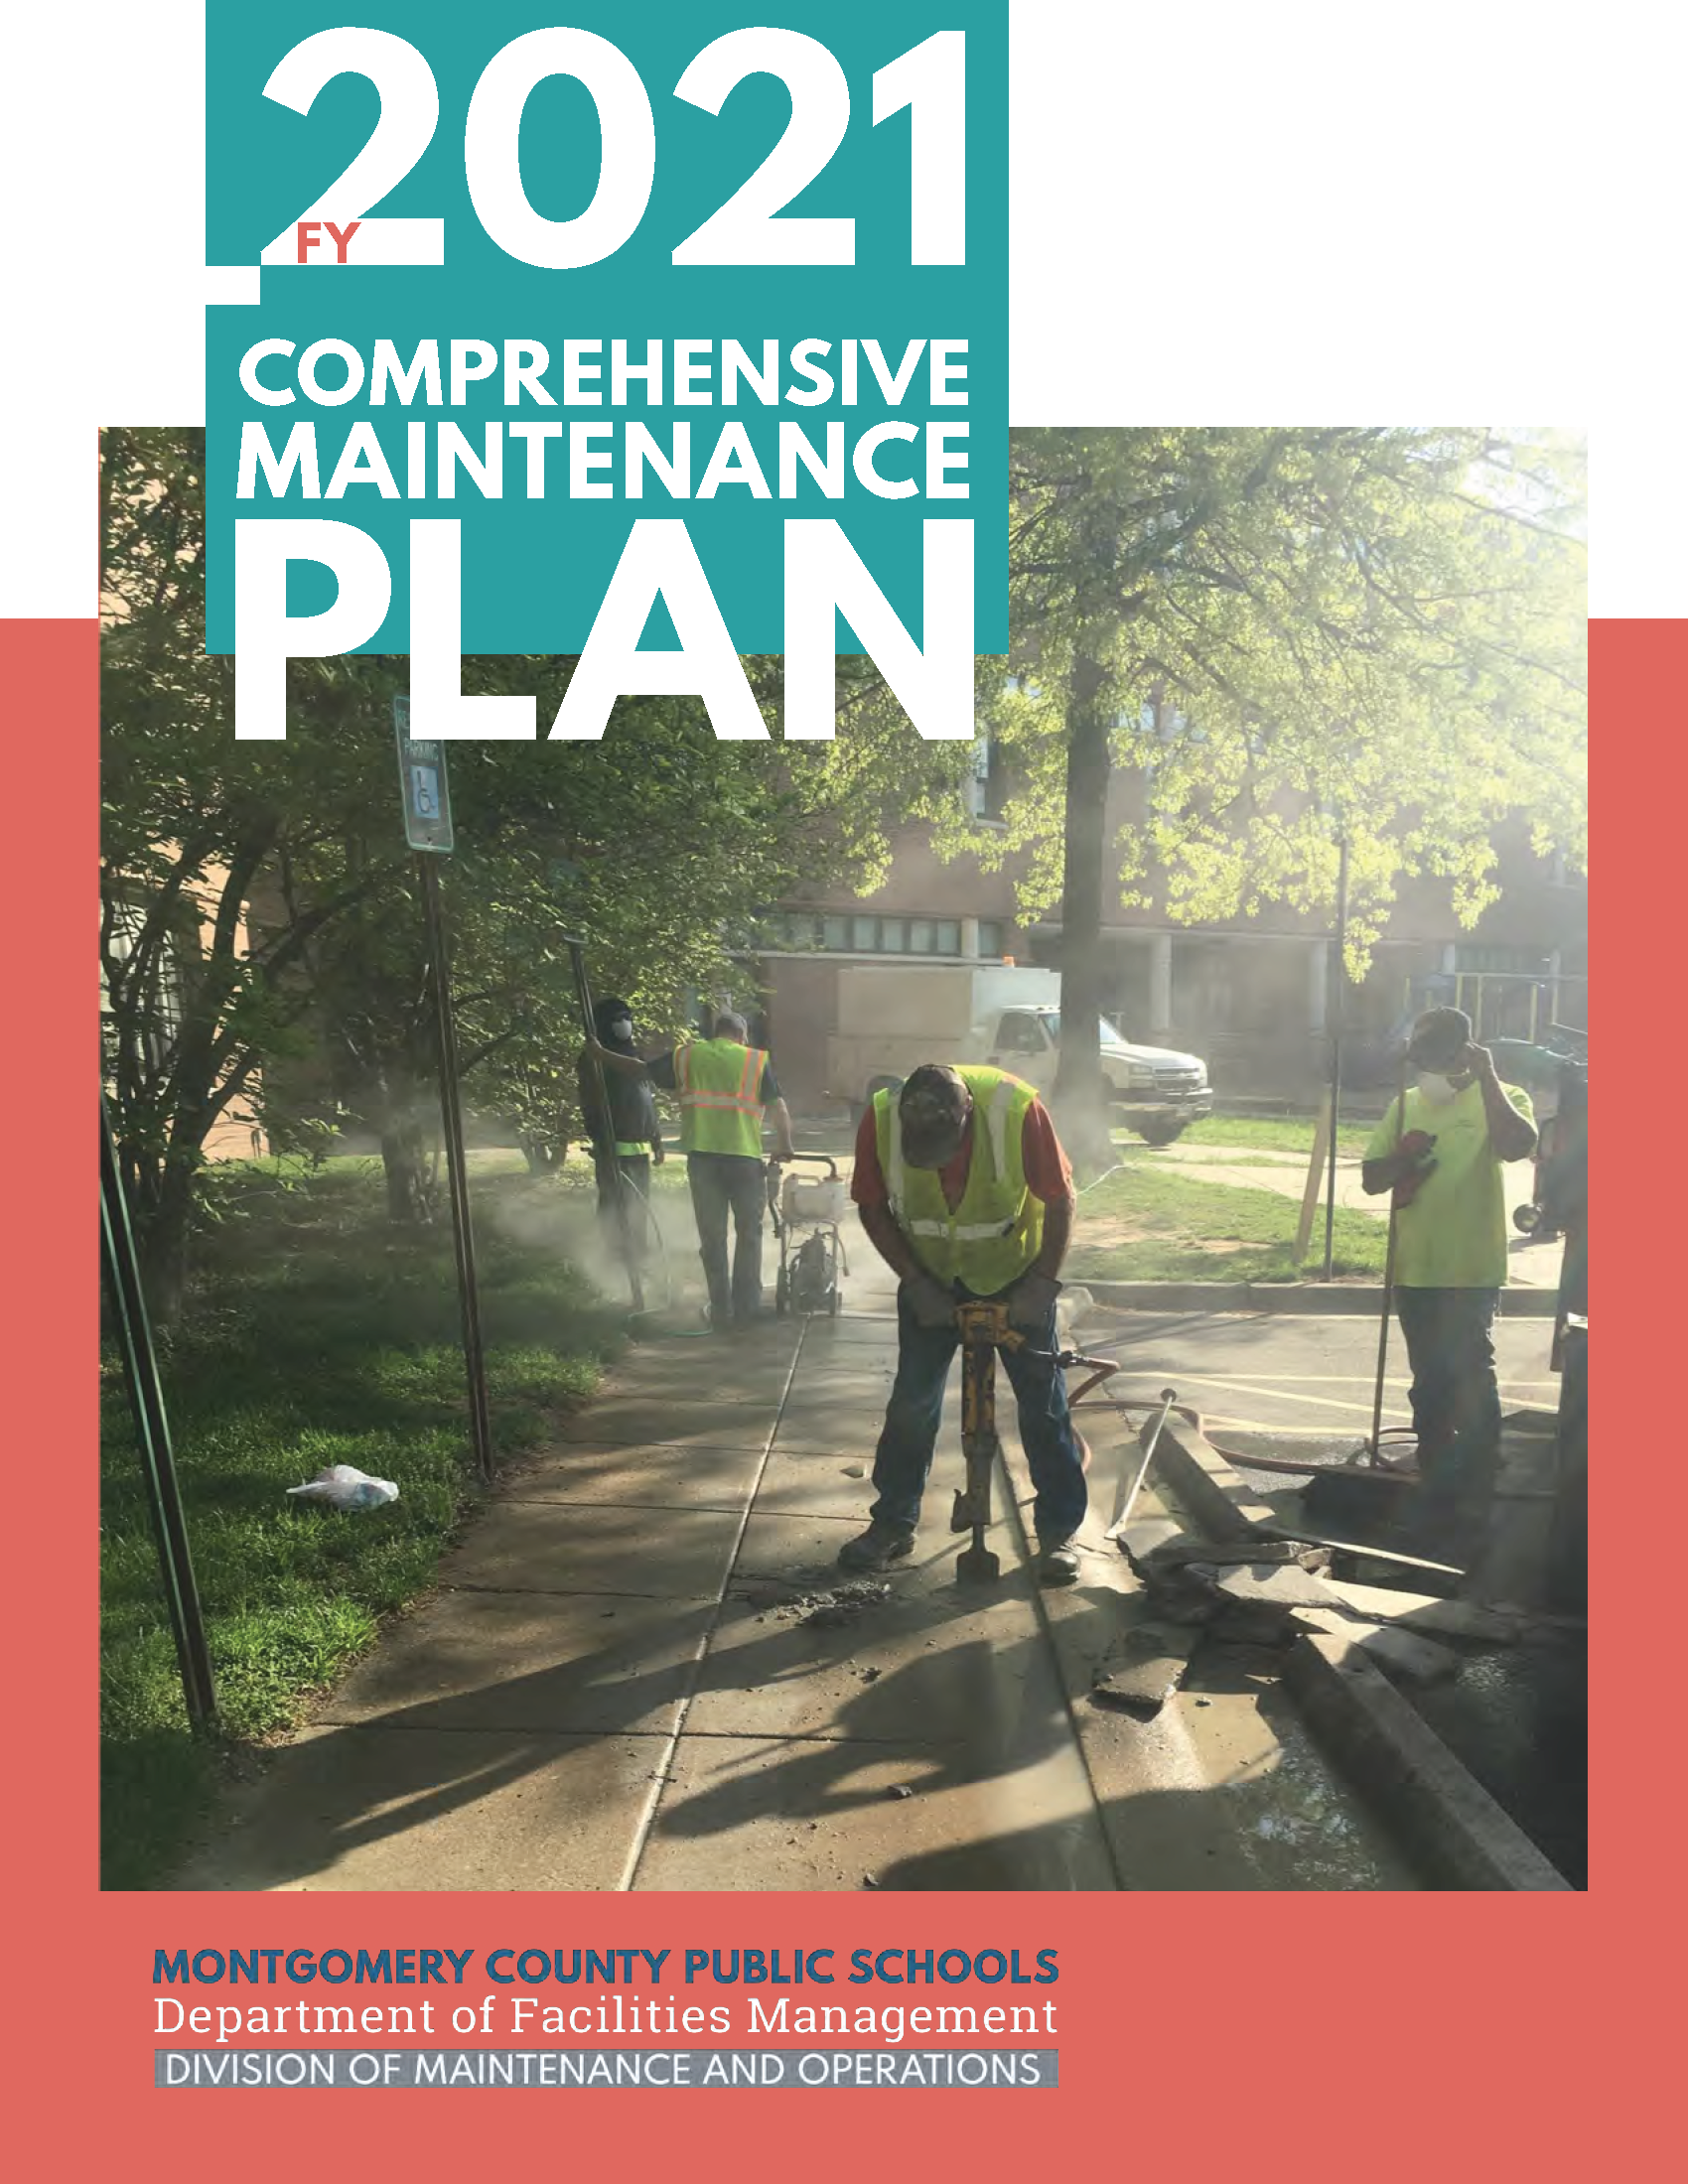 Click here to review the FY21 Comprehensive Maintenance Plan